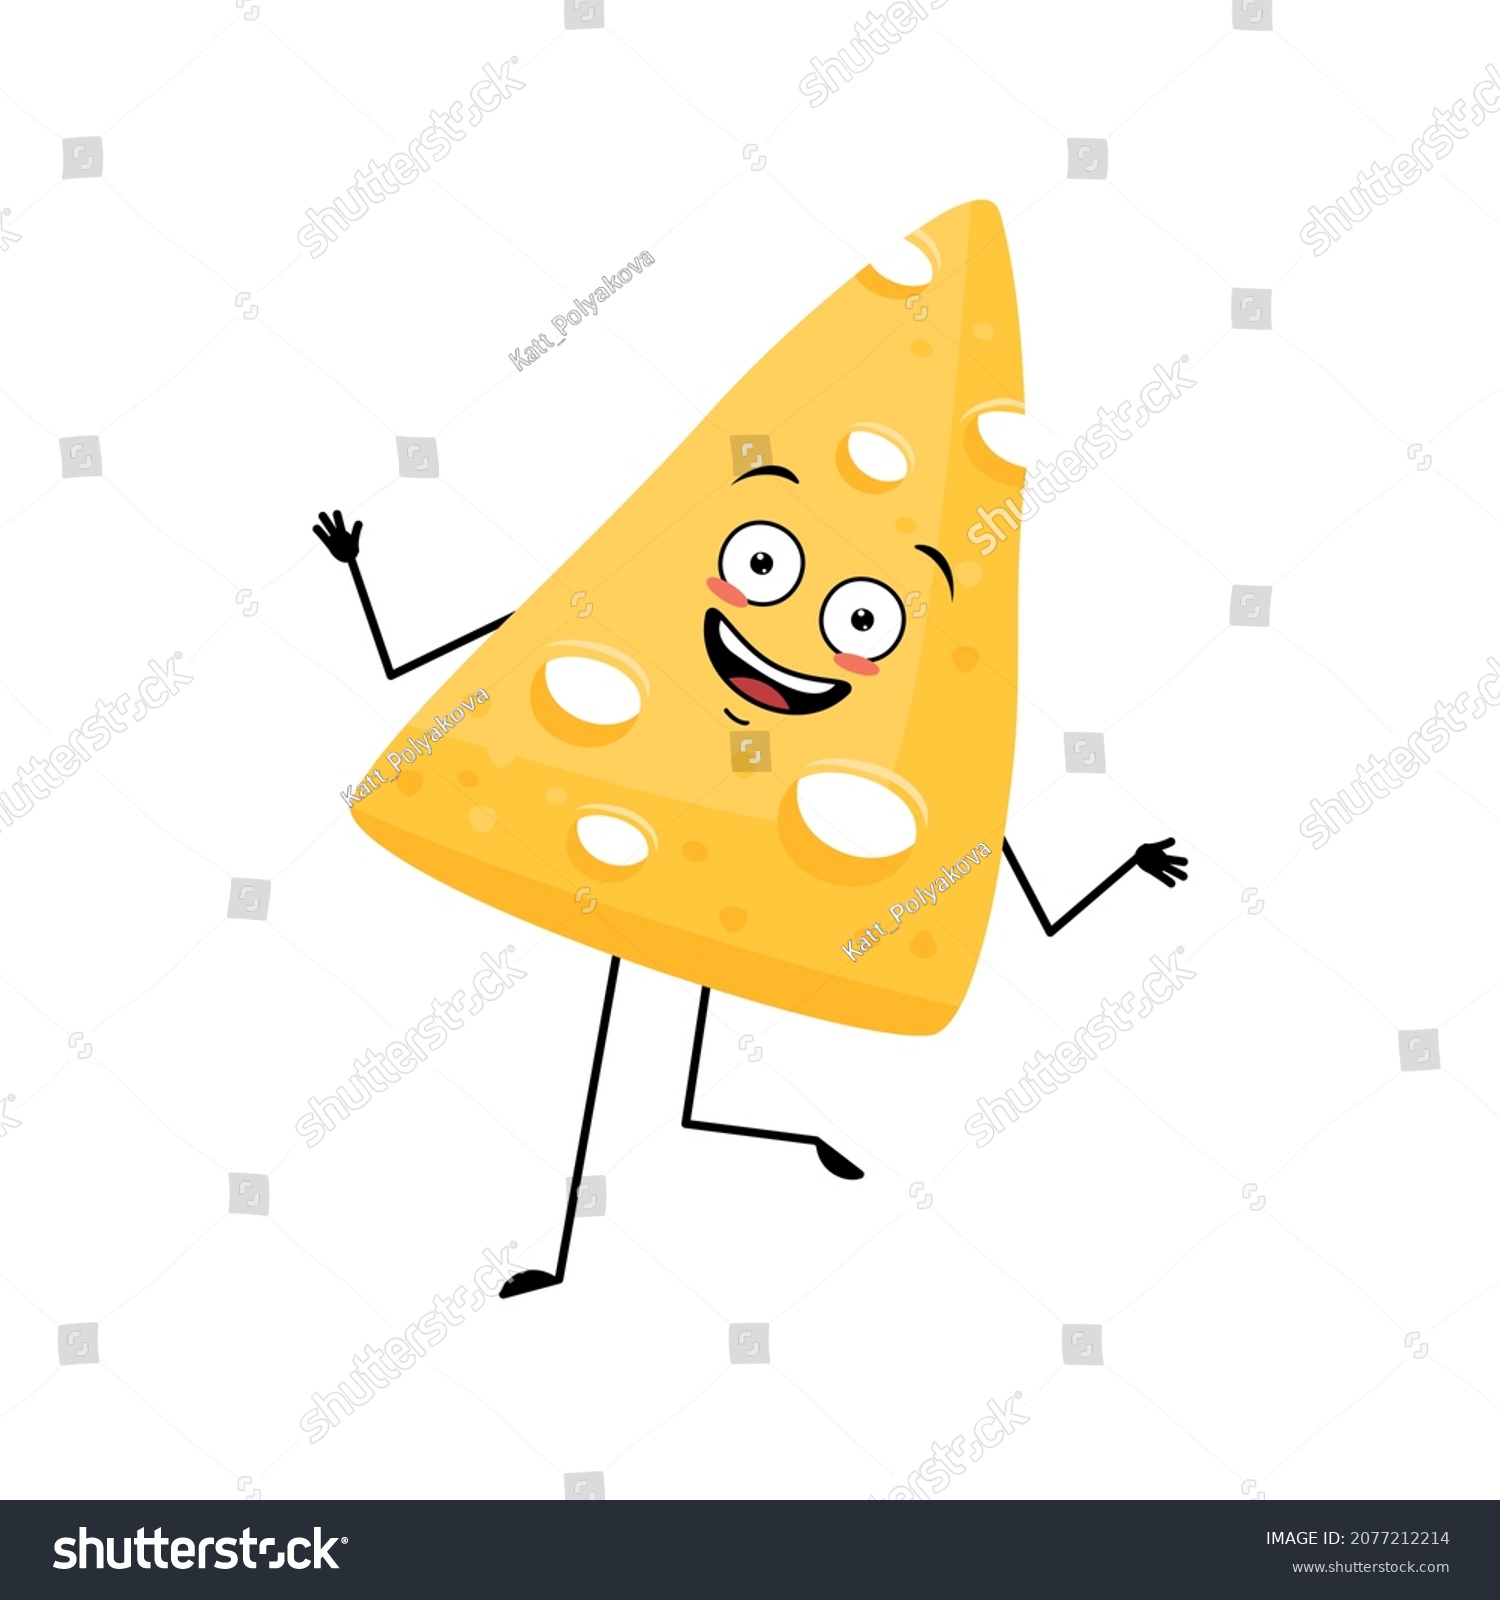 SVG of Cute cheese character with joyful emotions, happy face, smile, eyes, arms and legs. Fun dairy meal or snack. Vector flat illustration svg